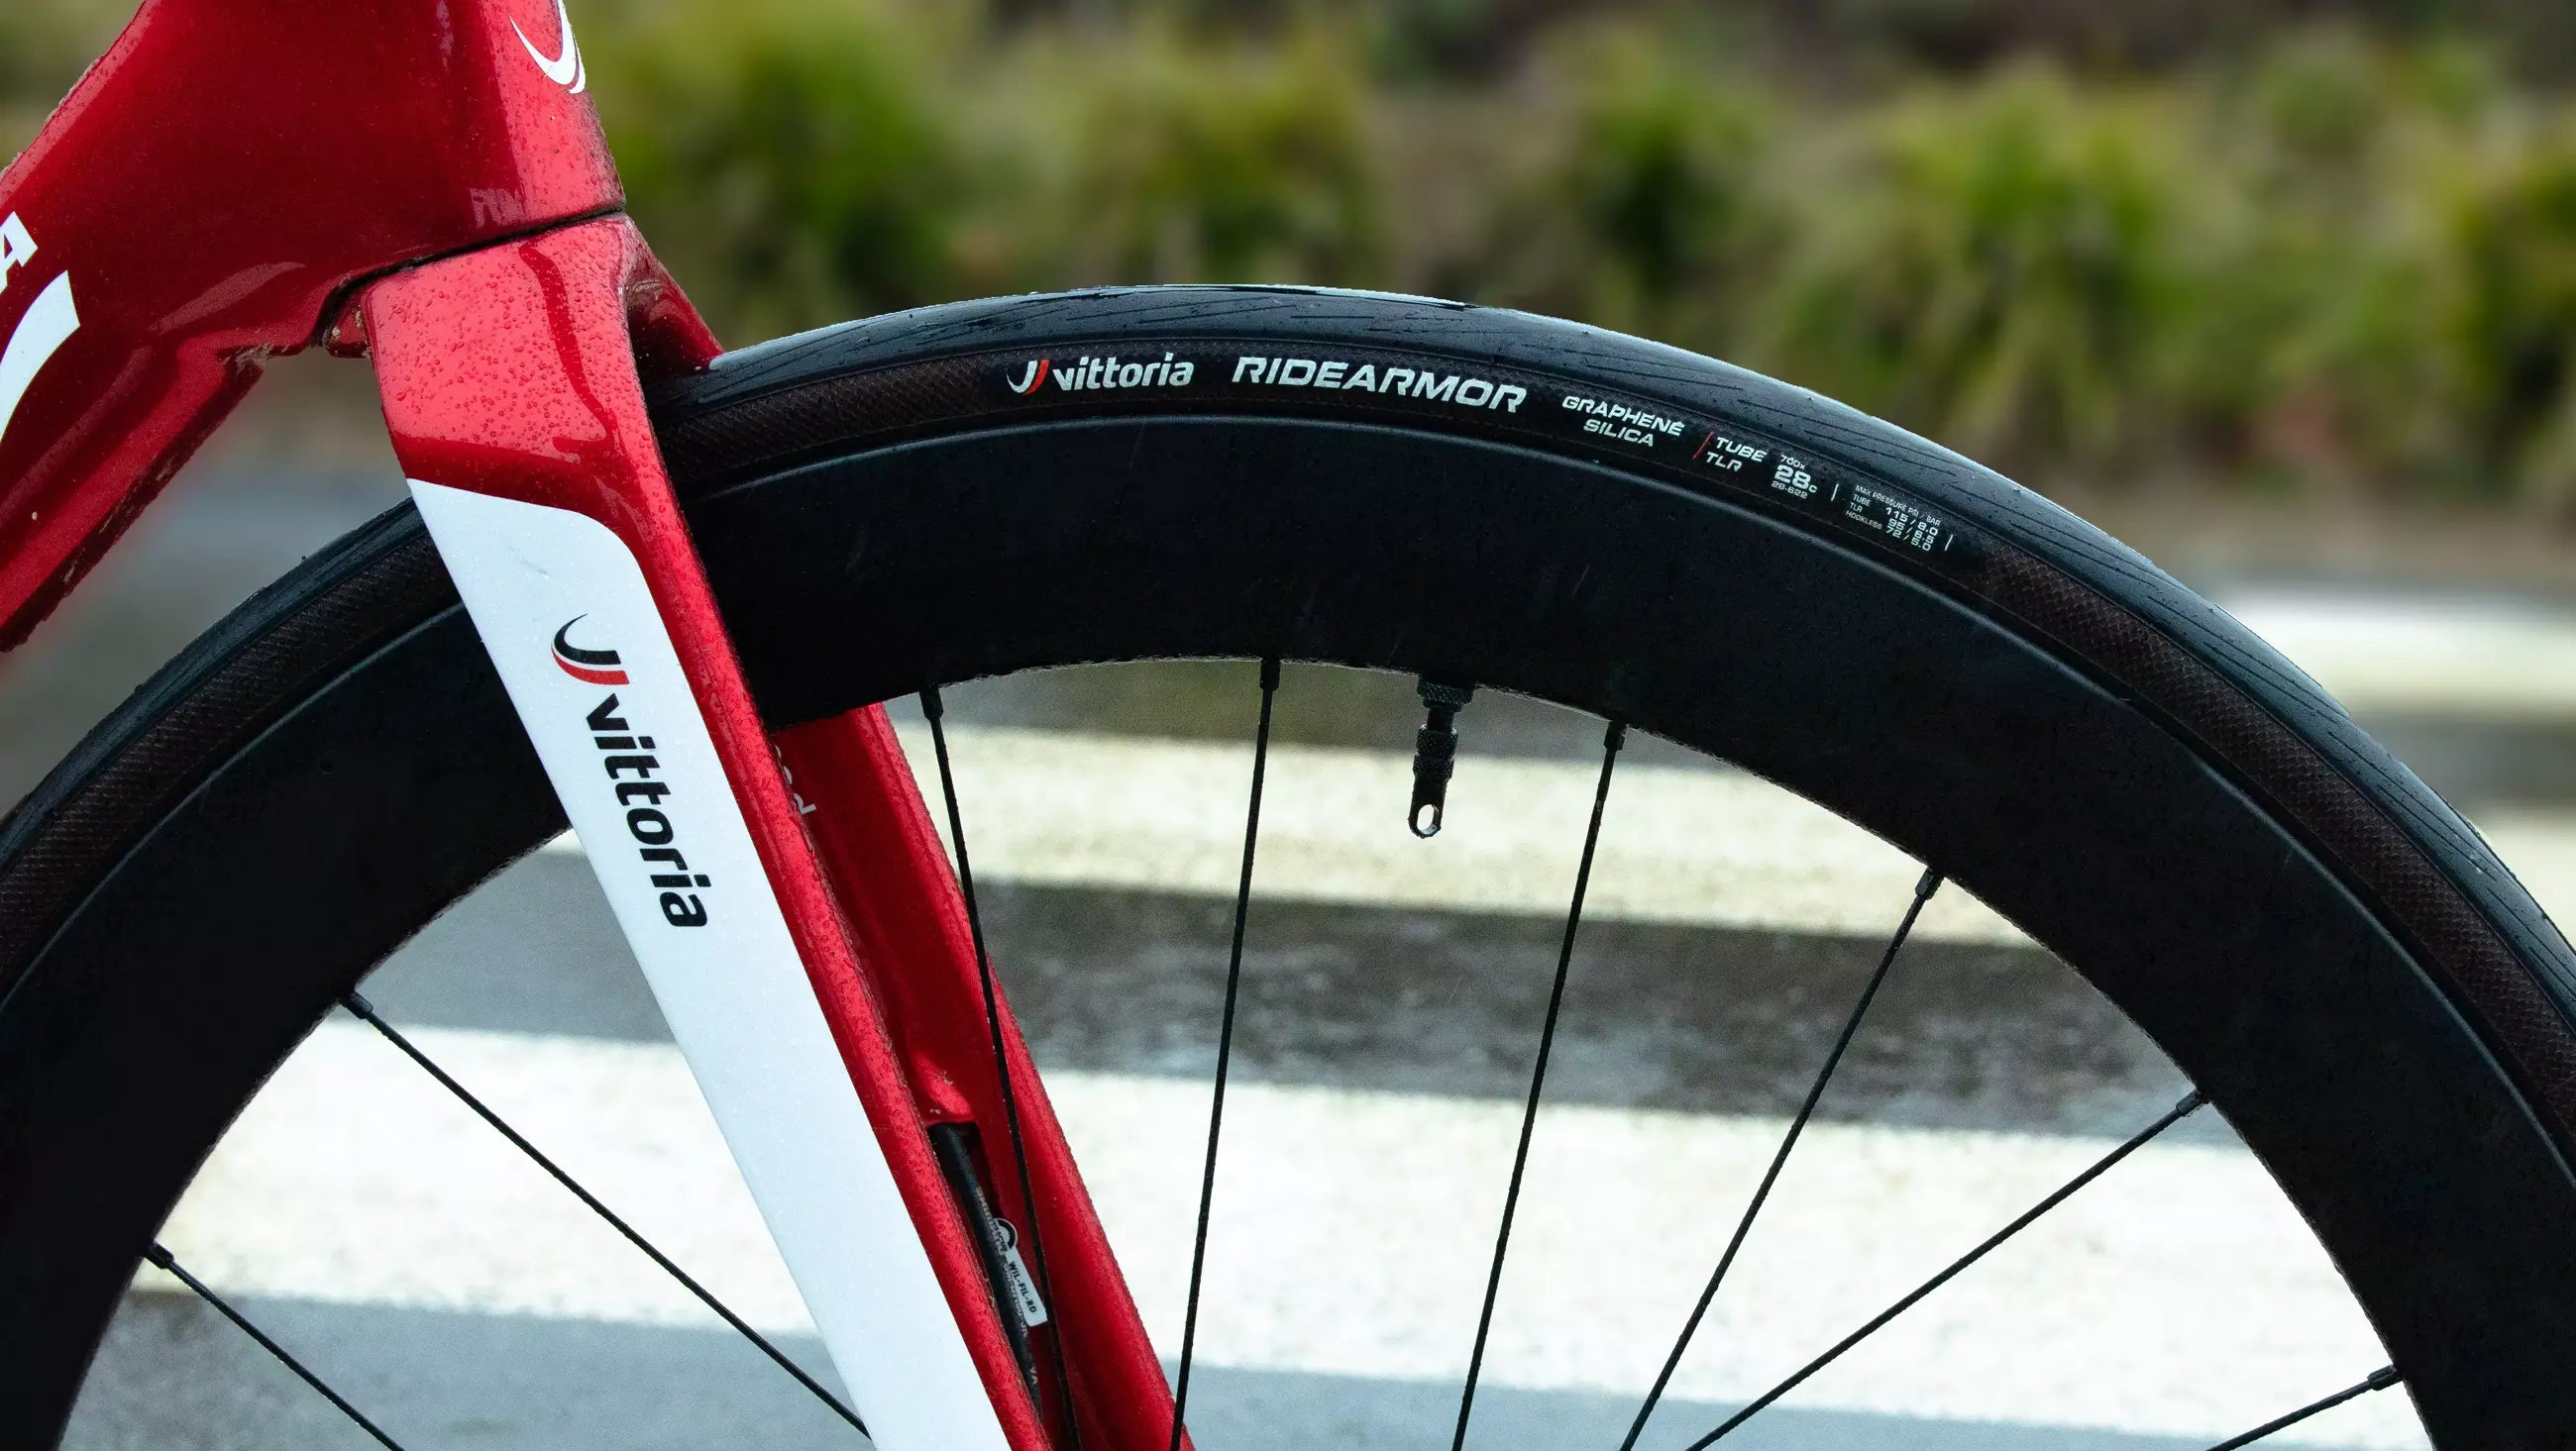 Be ready for anything with the new RideArmor: Vittoria’s most durable and puncture resistant road tire ever